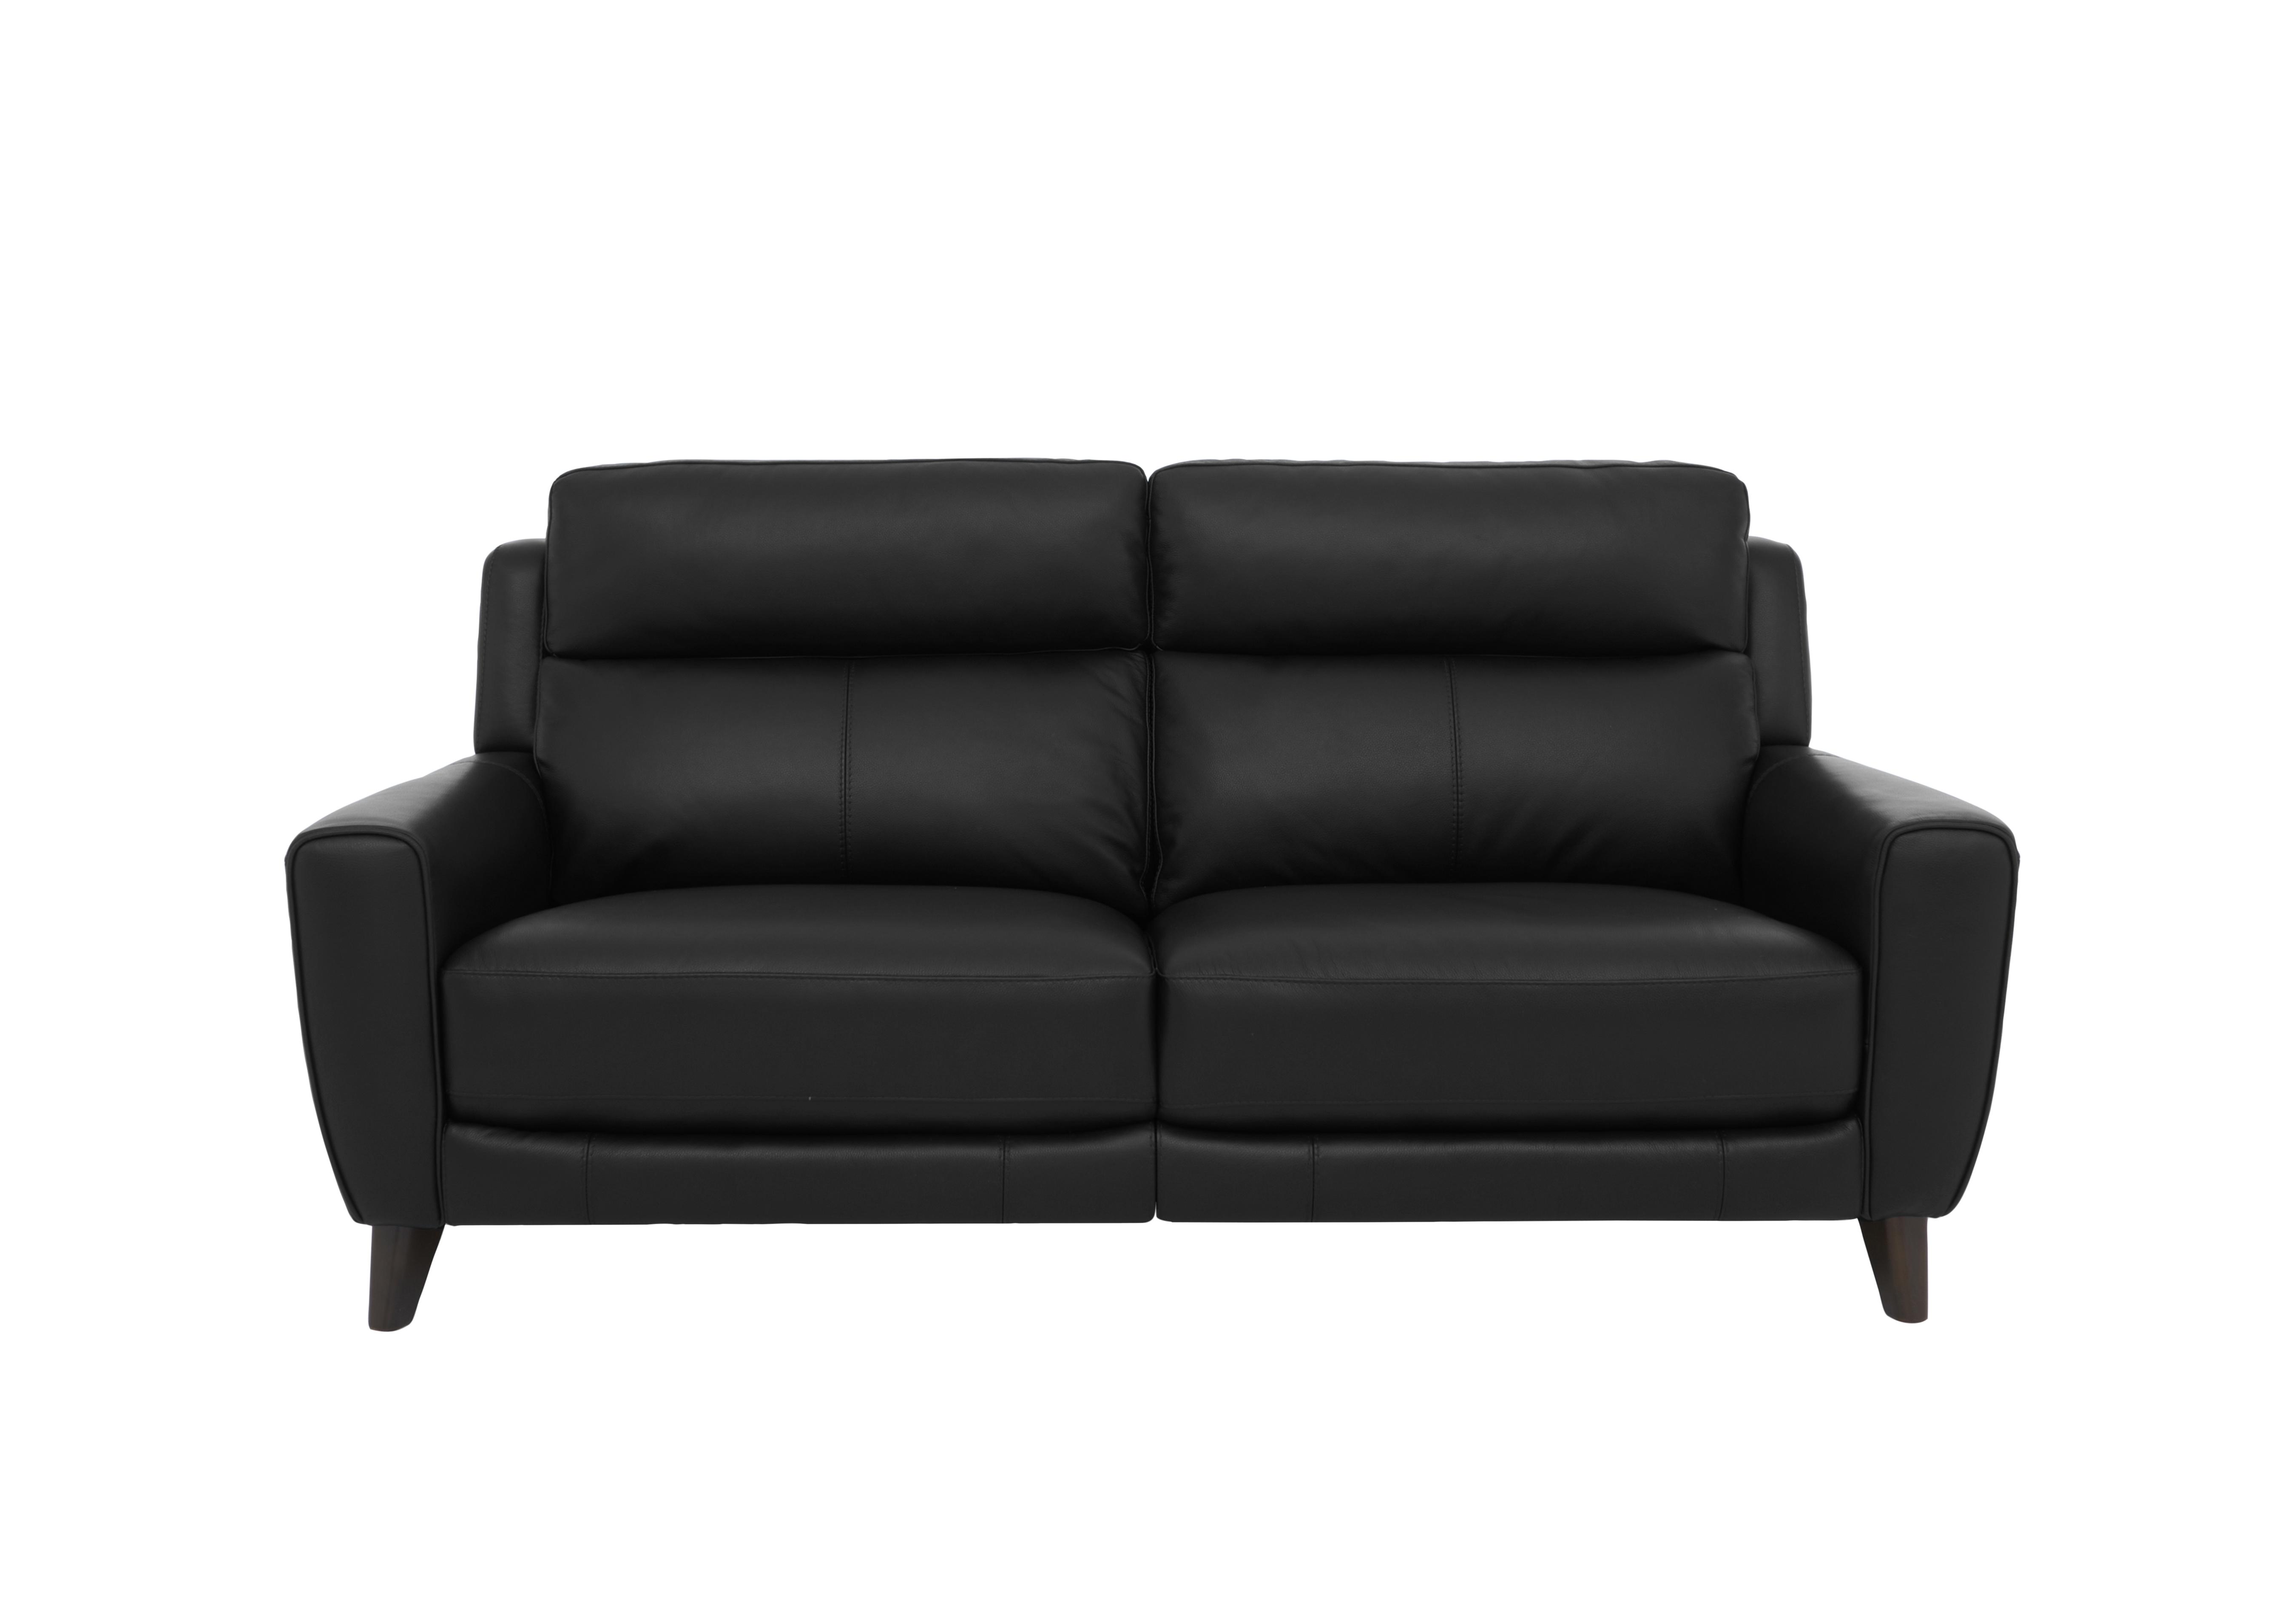 Zen 3 Seater Leather Power Recliner Sofa with Power Headrests and Power Lumbar in Bx-023c Black on Furniture Village